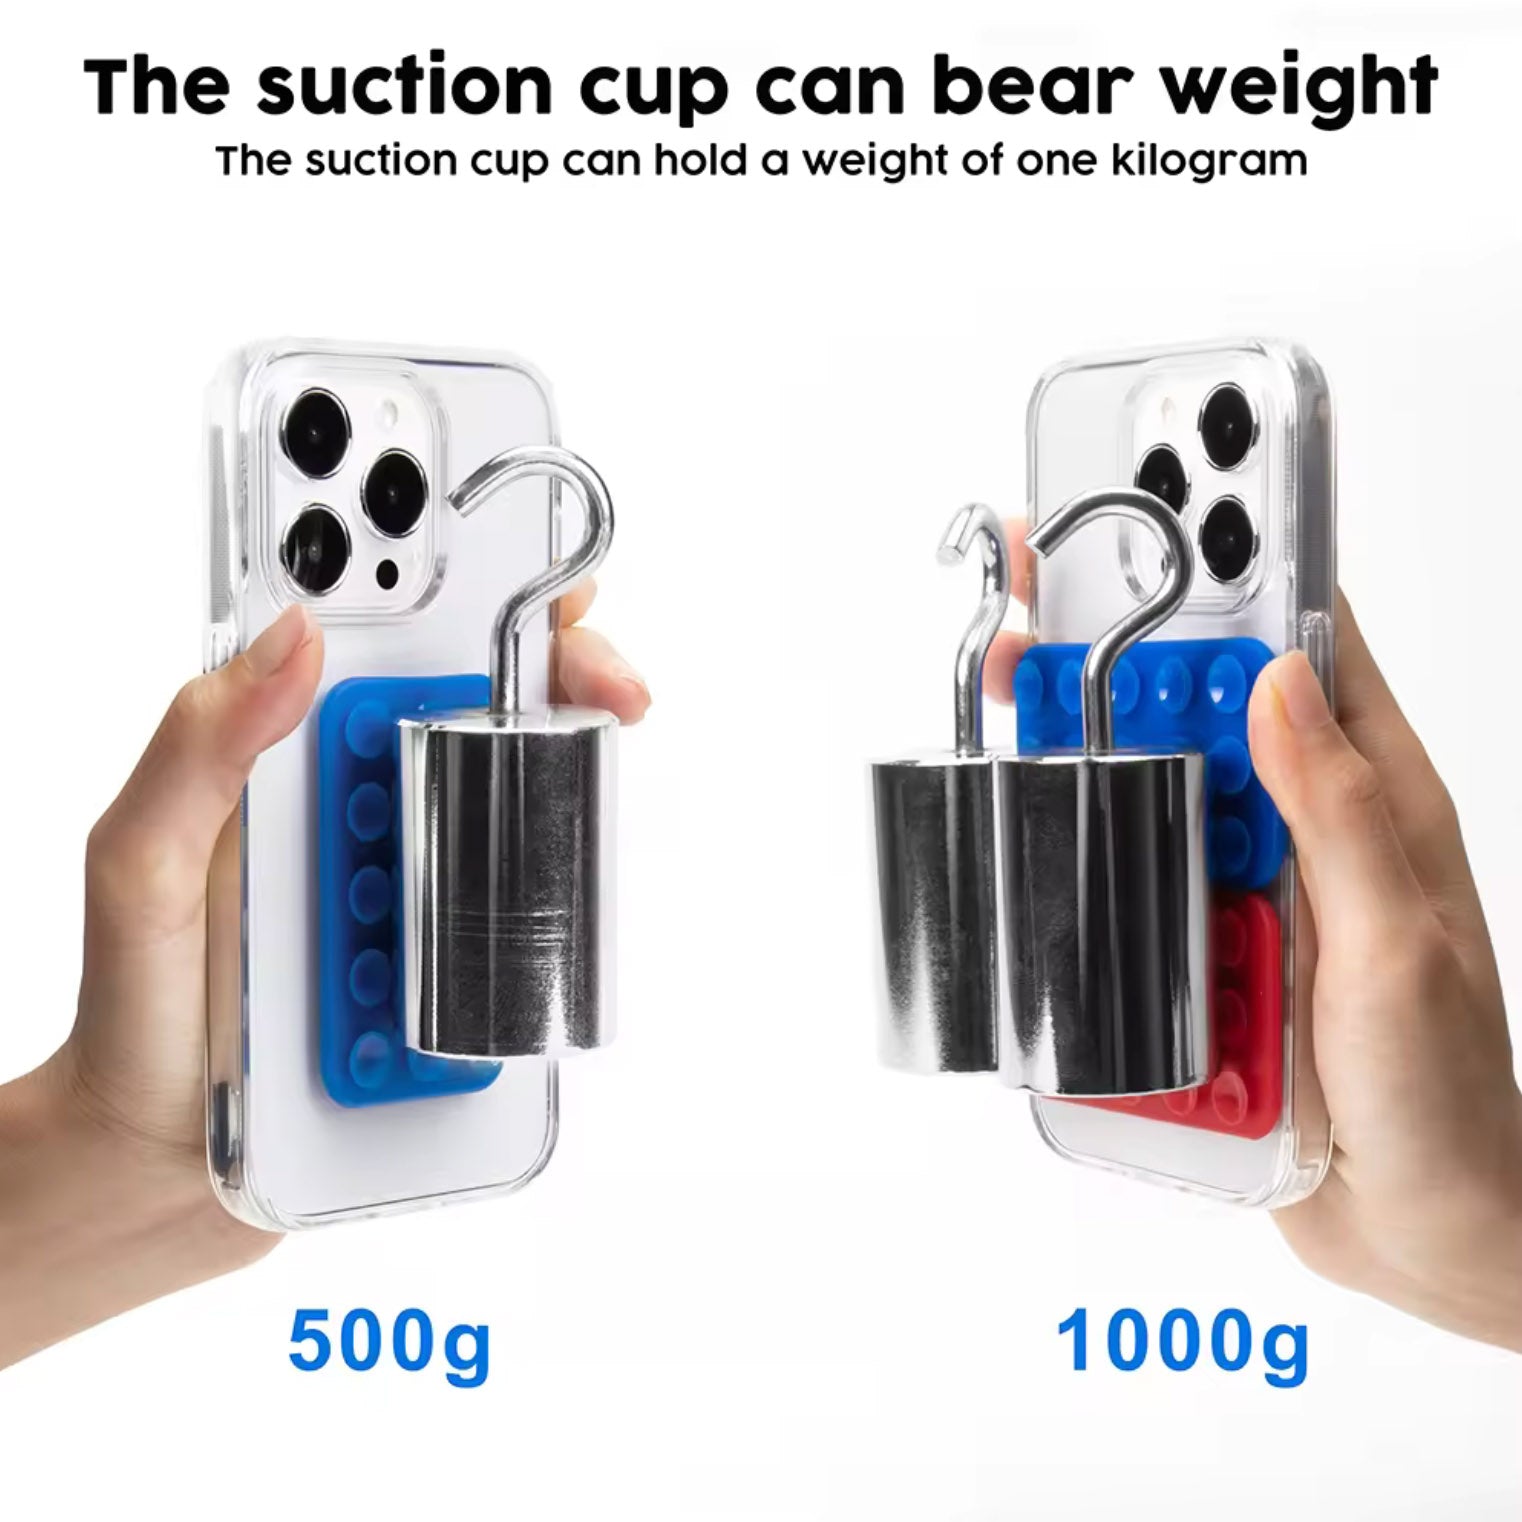 Double faced 15 cups Silicone Suction Phone Case Adhesive Mount for iPhone and Android